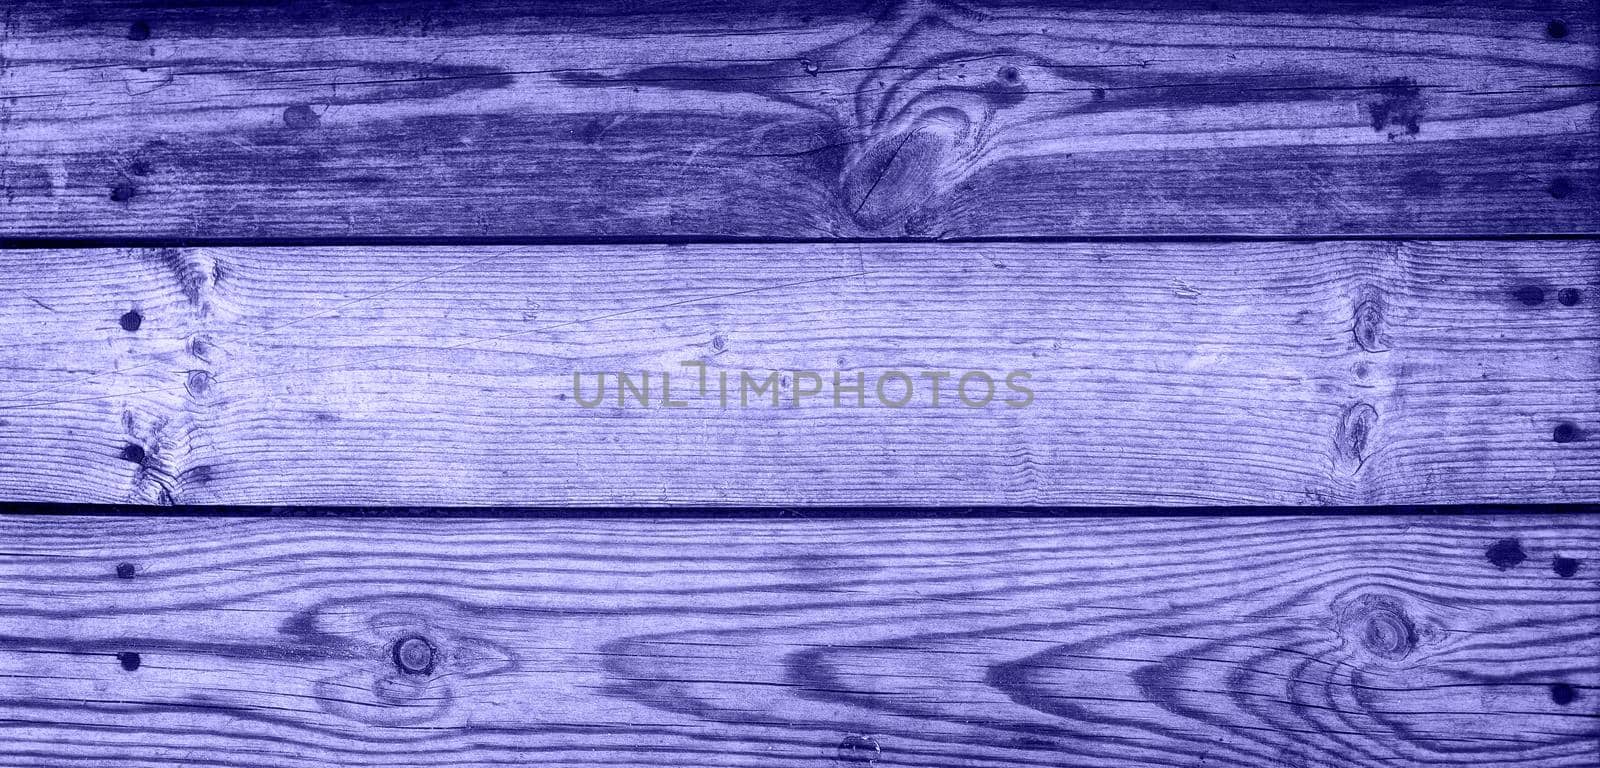 Lilac background - an old dark wood texture, with a horizontal pattern of wood. Copy space. Banner